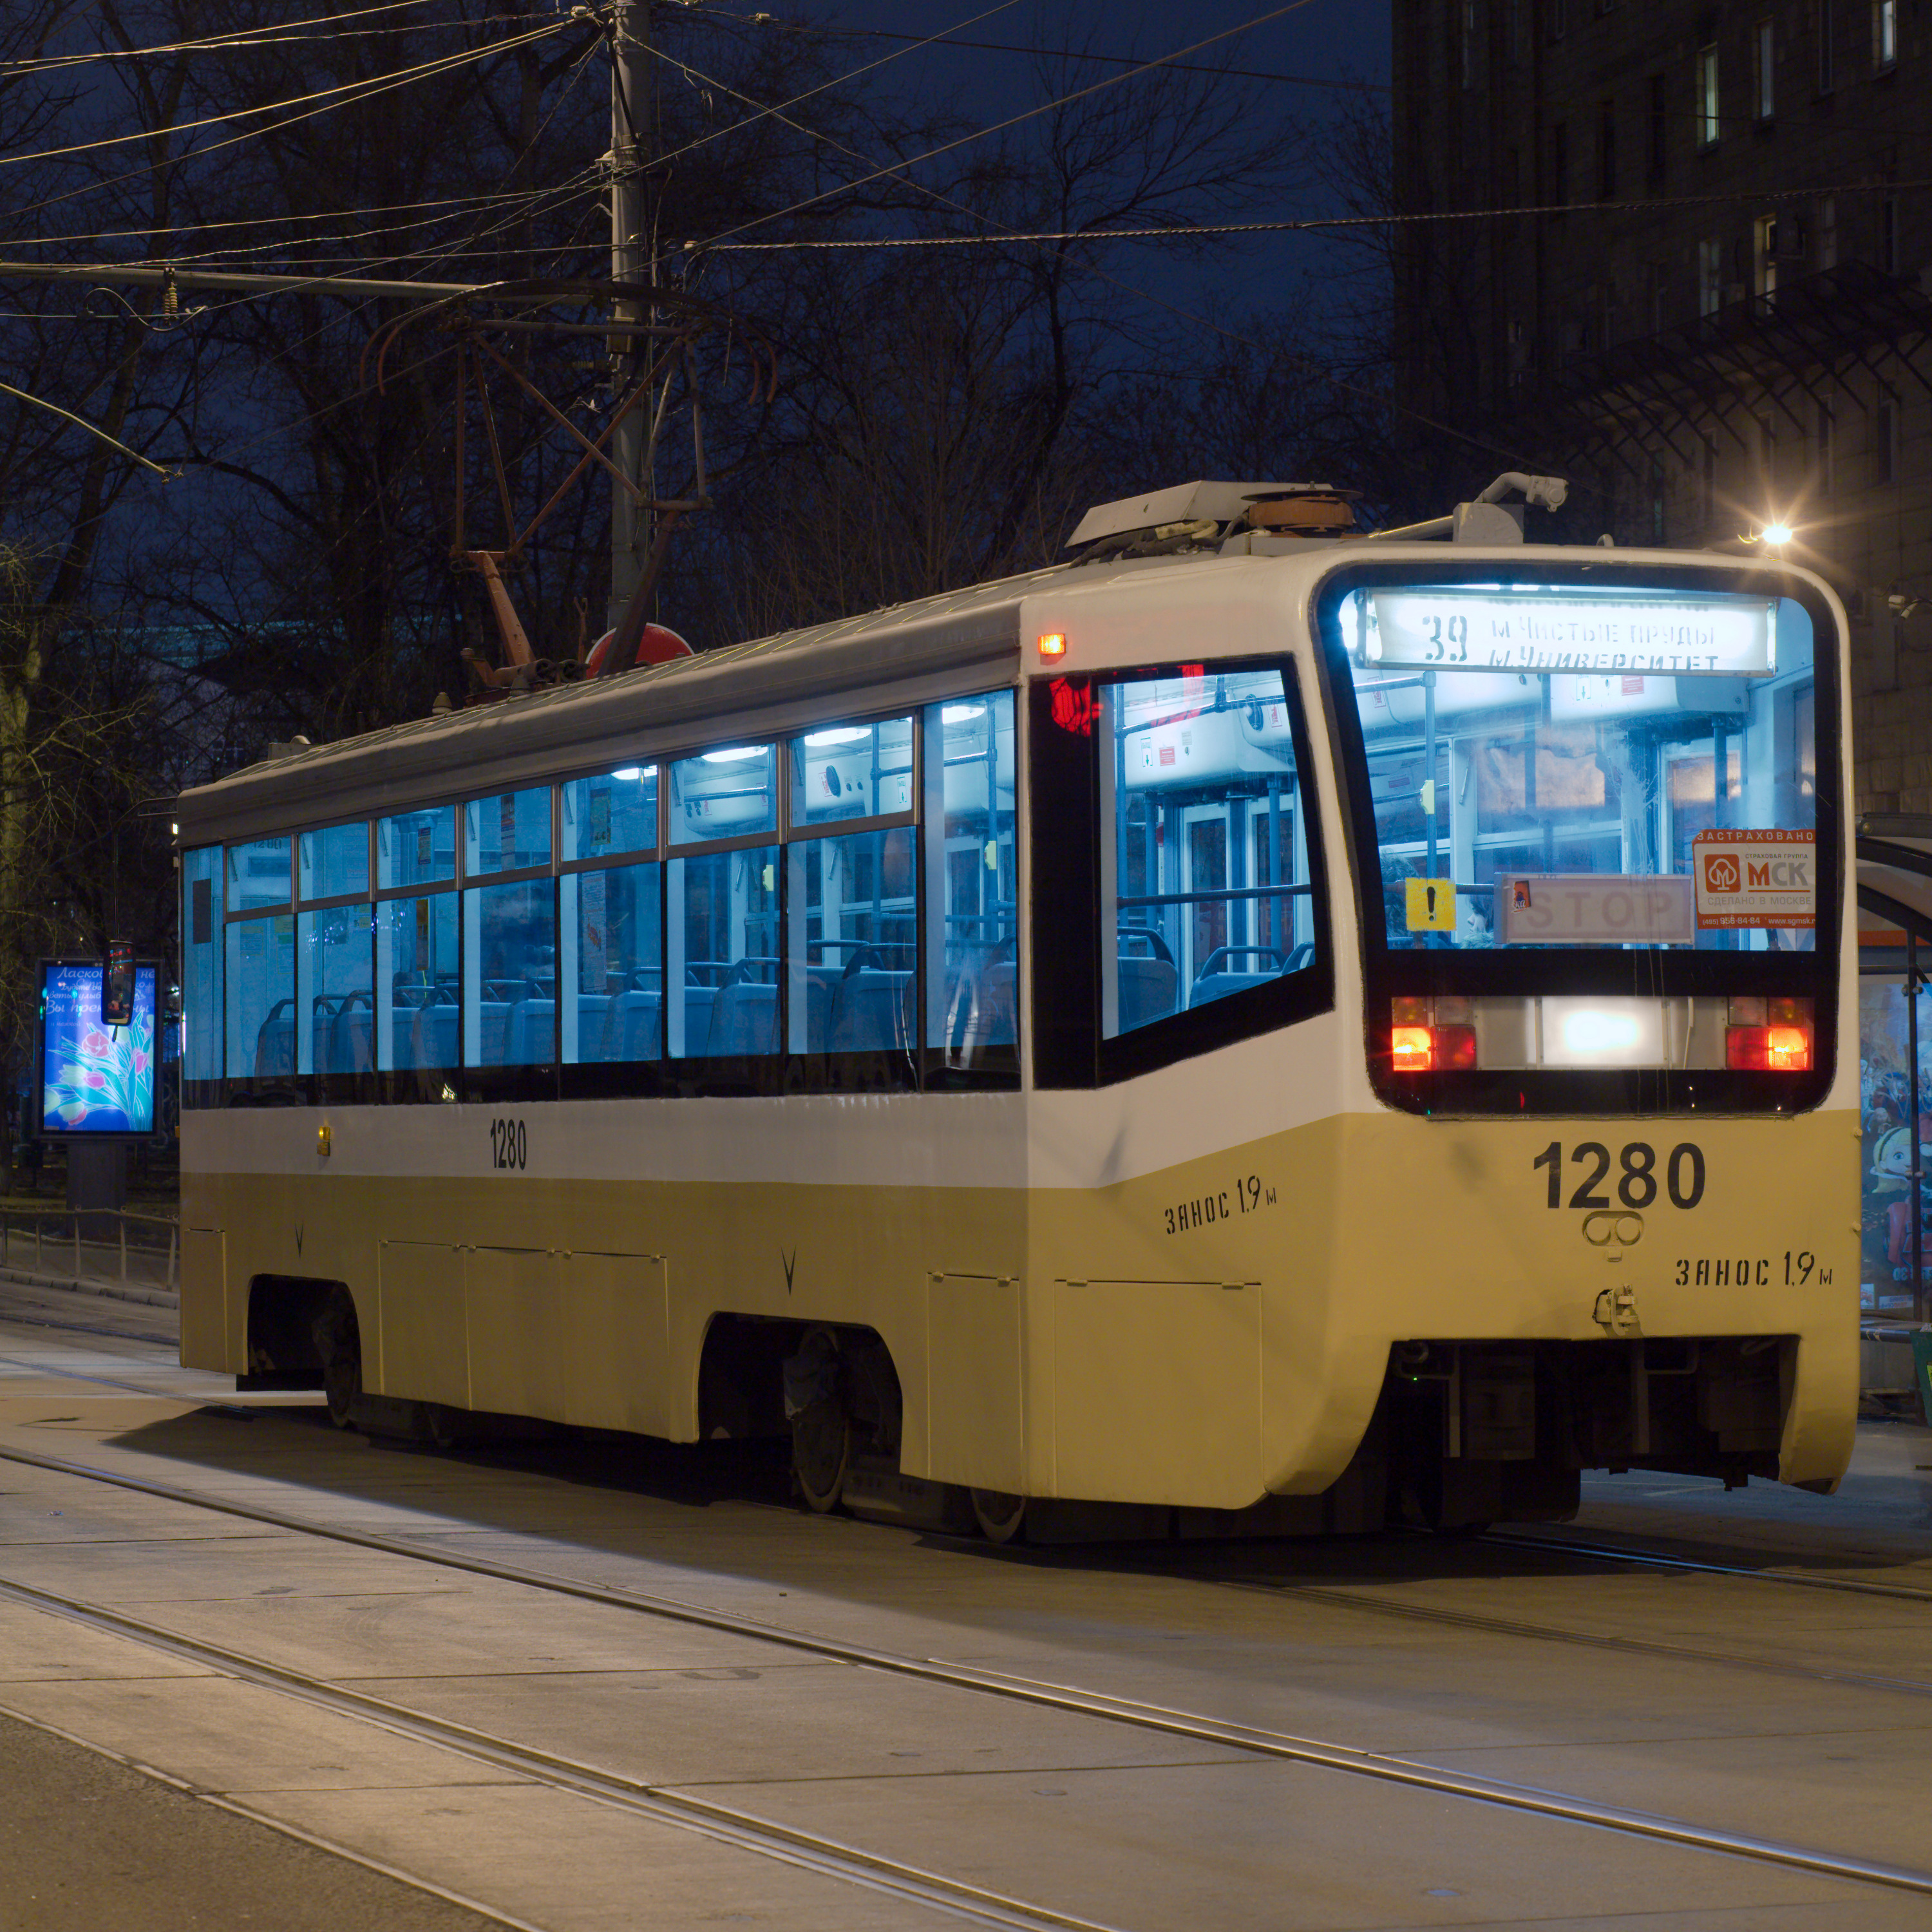 71-619 tram on 39 route at Sadovnicheskaya st. of Moscow at Feb 2014